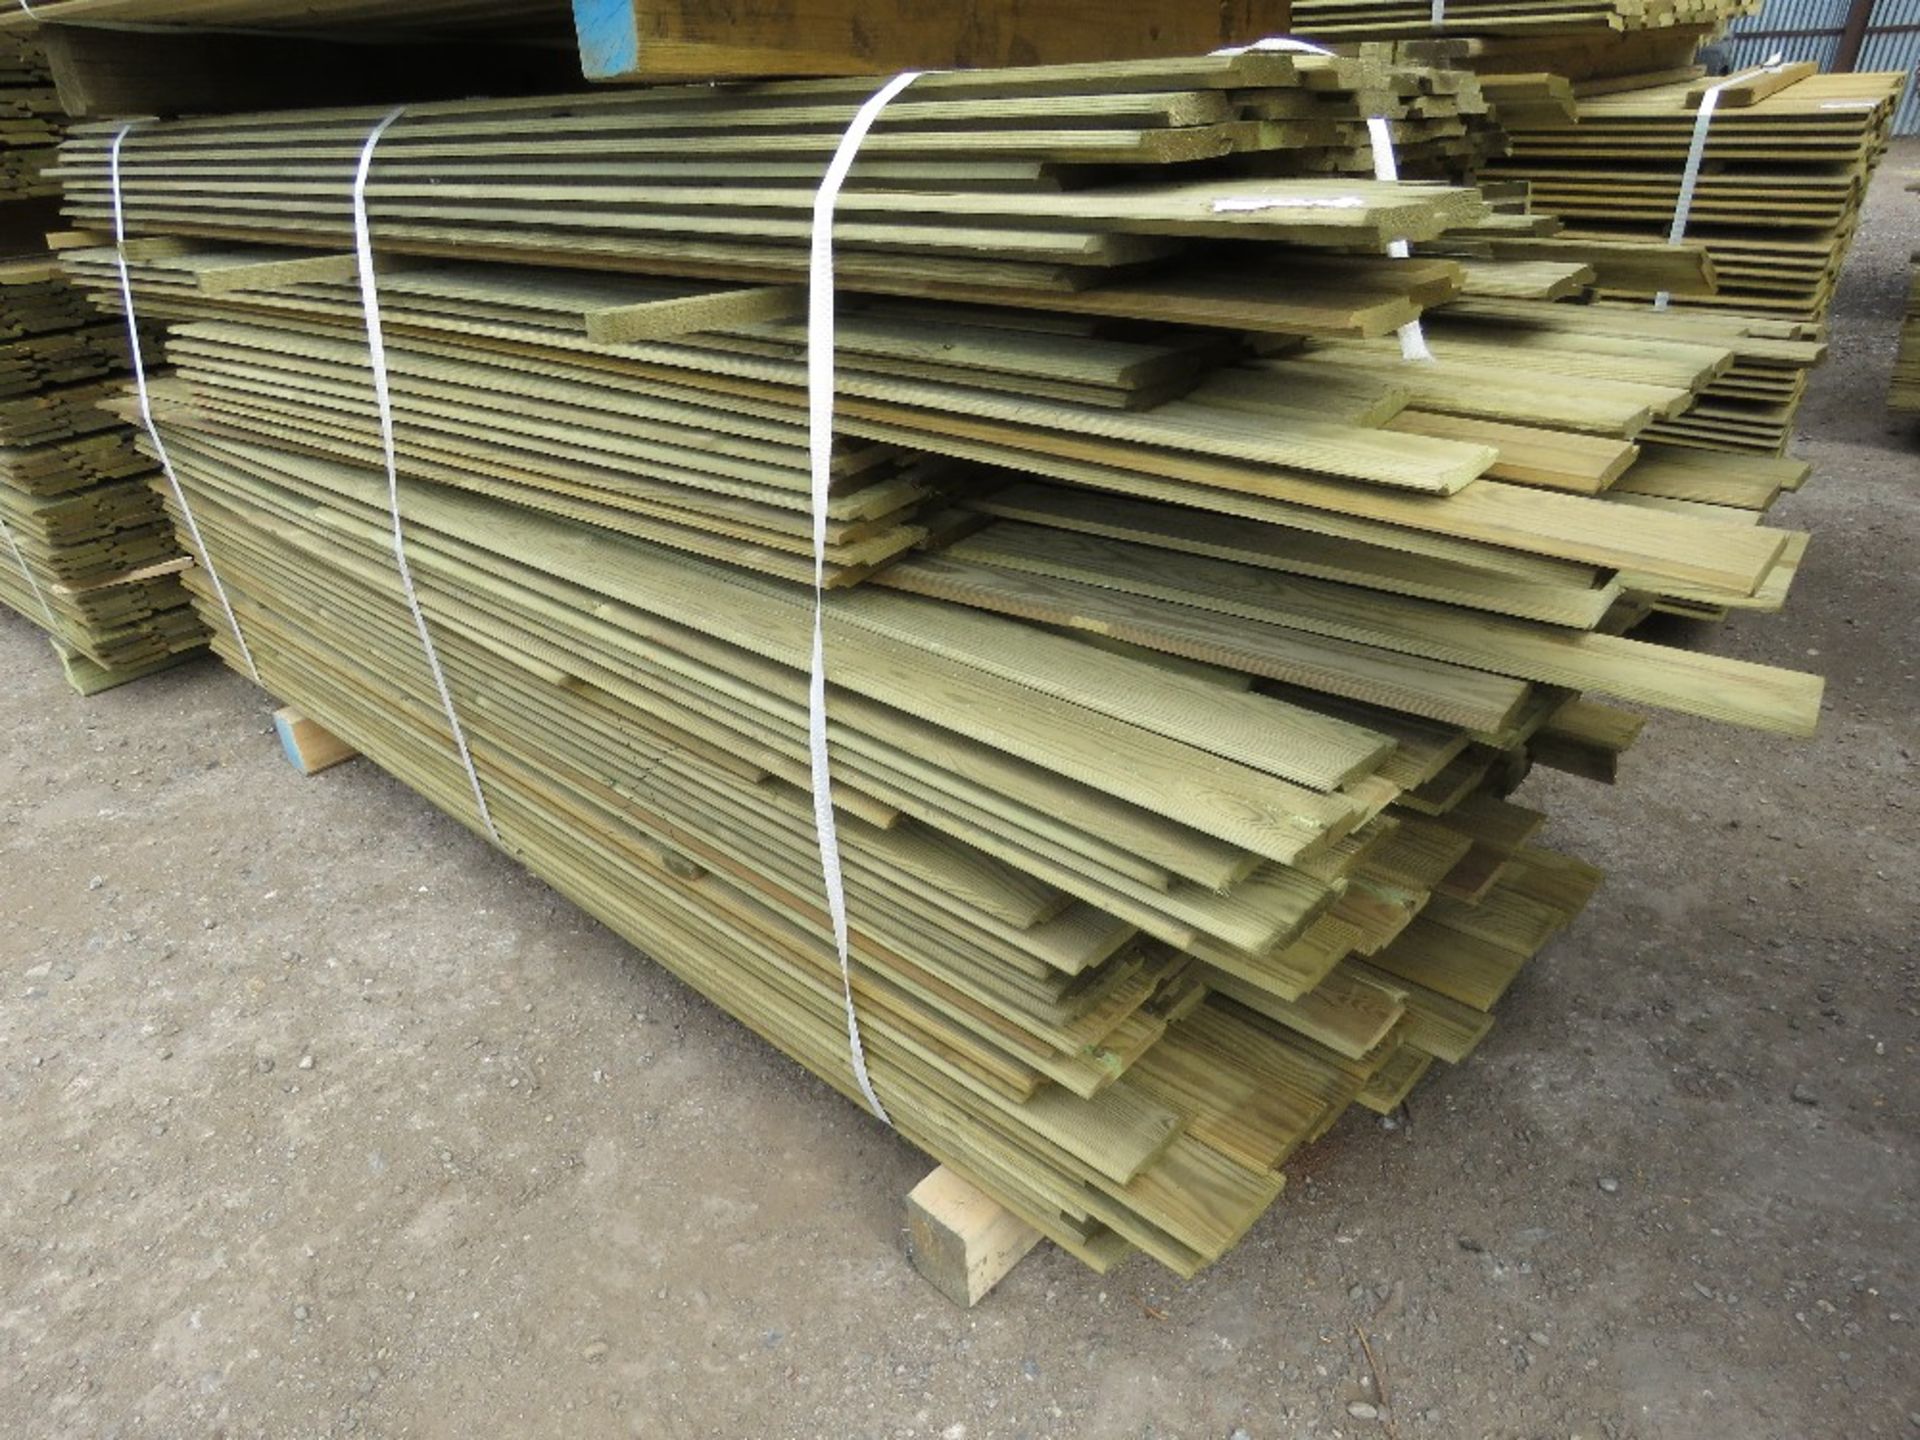 LARGE PACK OF PRESSURE TREATED TIMBER SHIPLAP CLADDING FOR FENCING PANELS ETC MIXED @ 1.1-1.9M LENGT